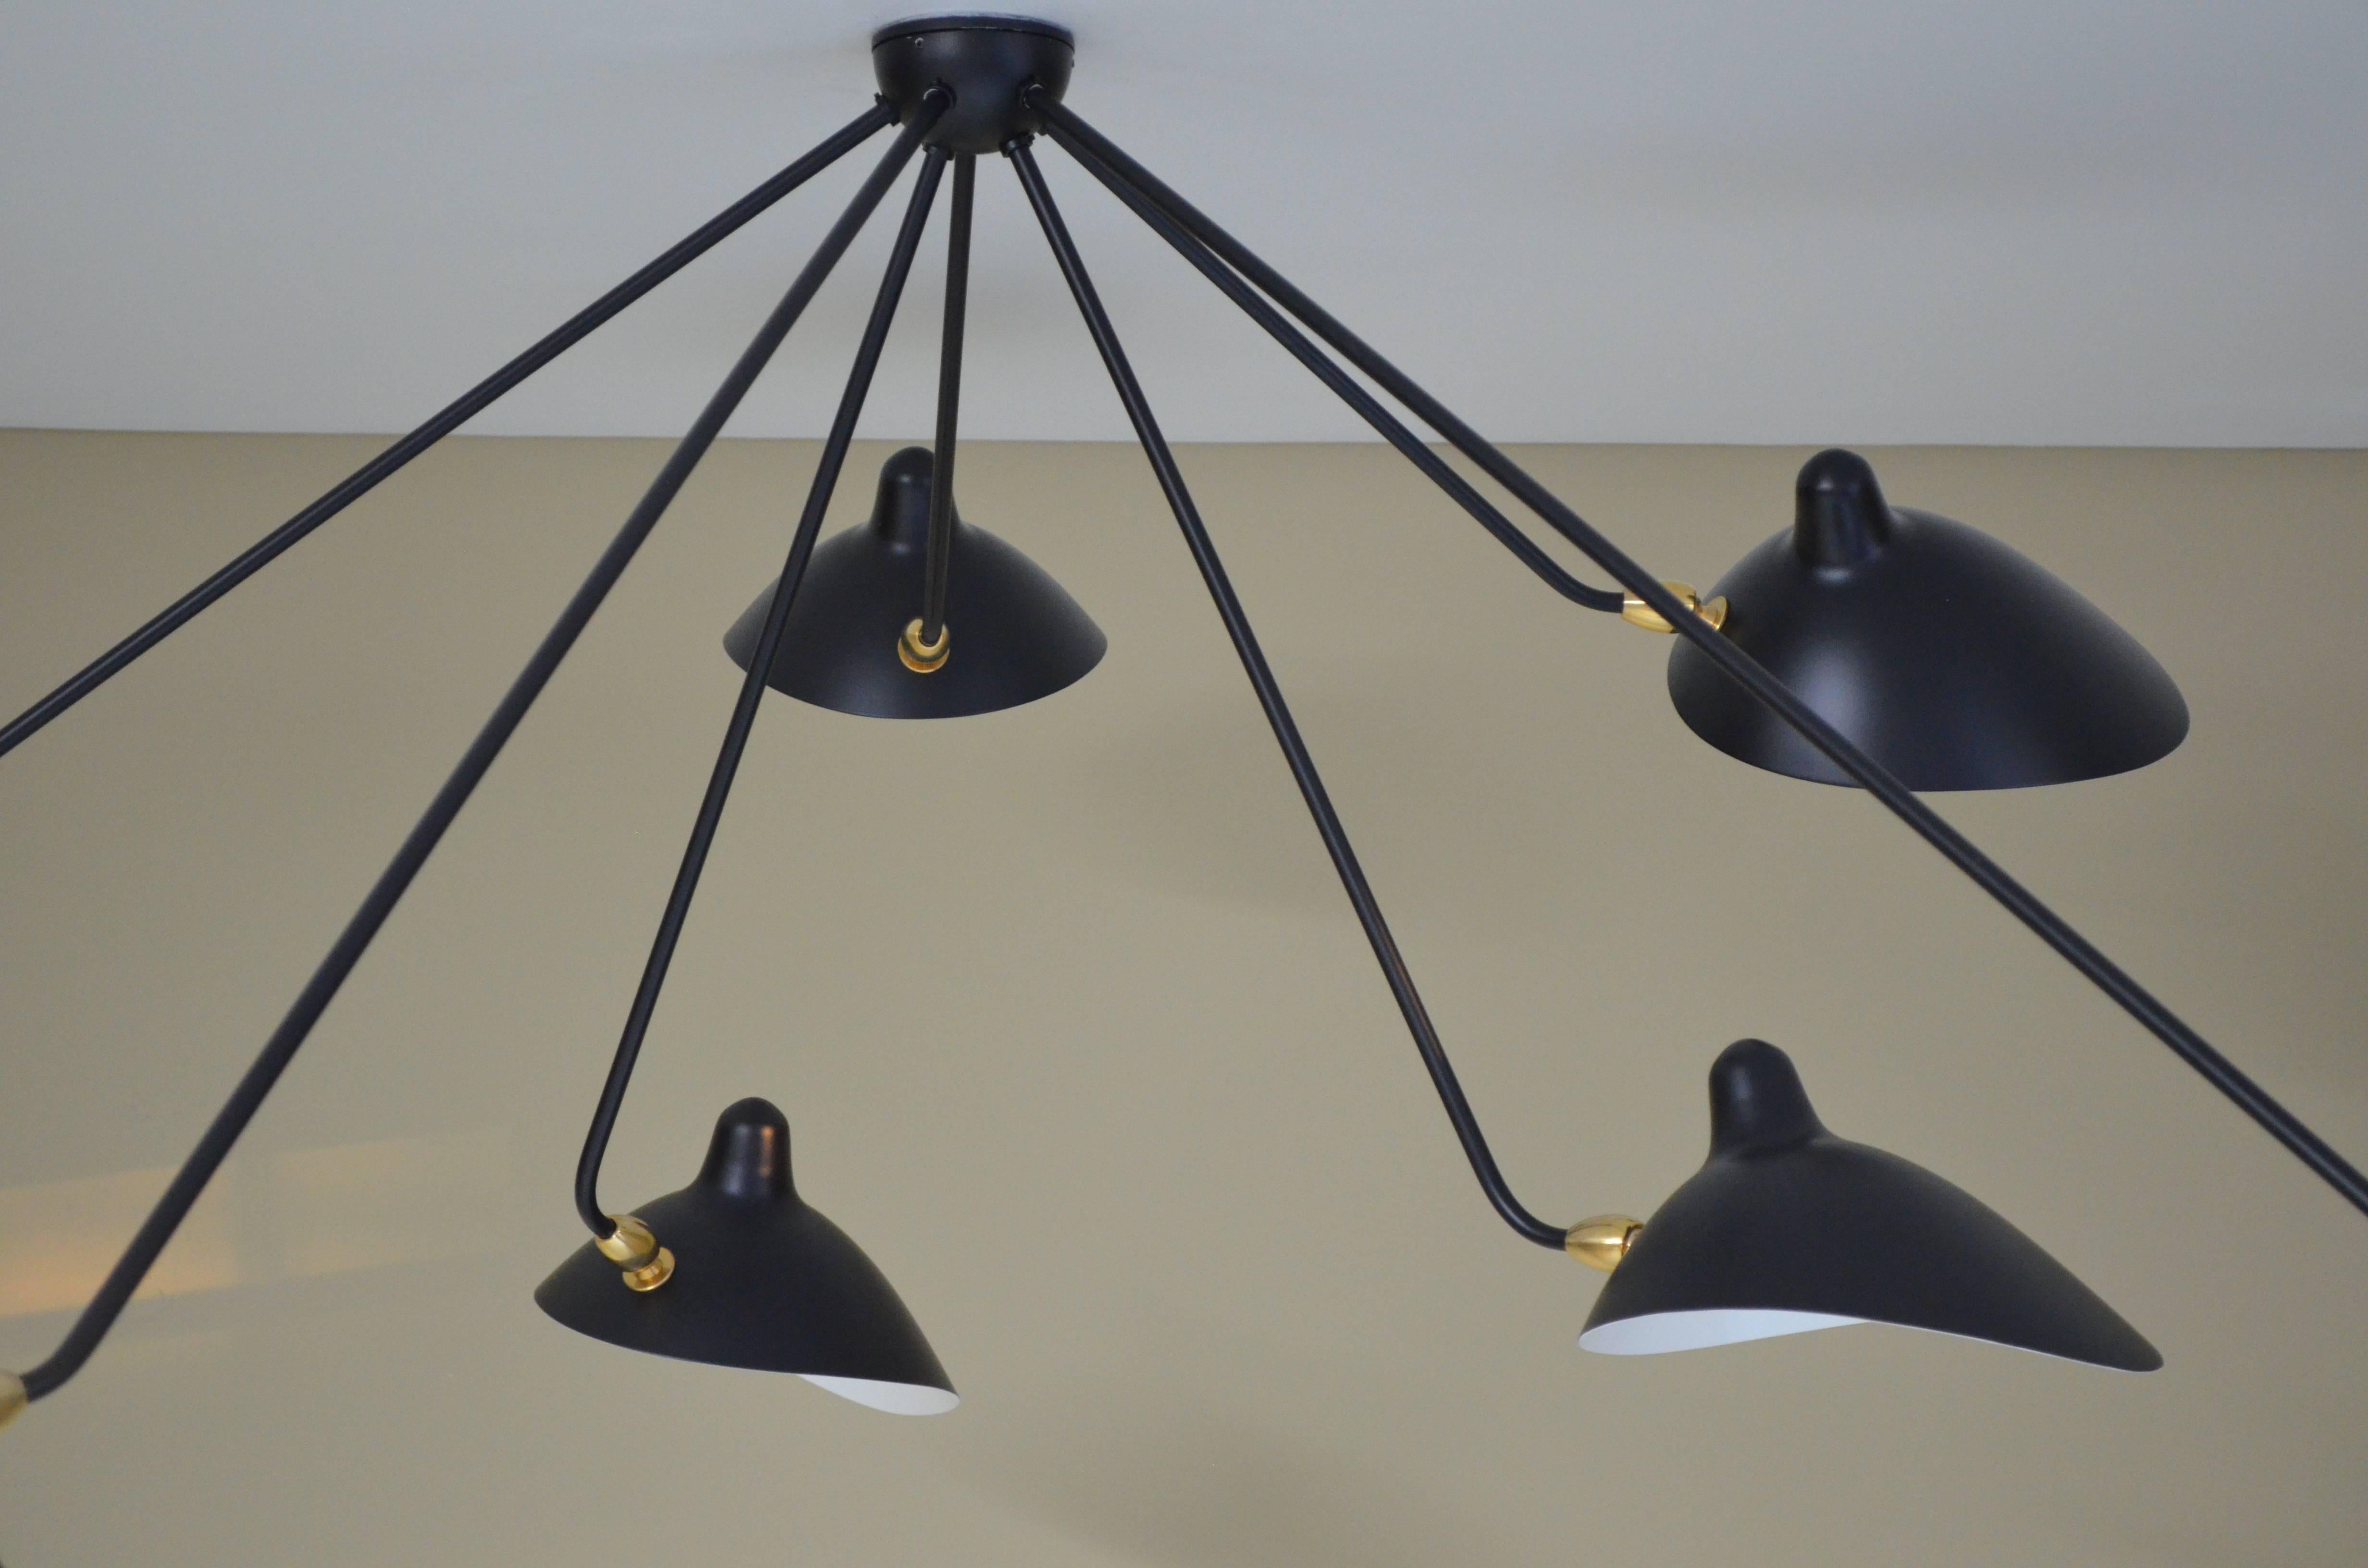 This lamp with rotating heads on seven fixed arms is a statement as much as it is a ceiling lamp - one that will command the conversation.

Available in white or black. Brass swivels connect the shades.

COLOR OPTION
Available in Black or